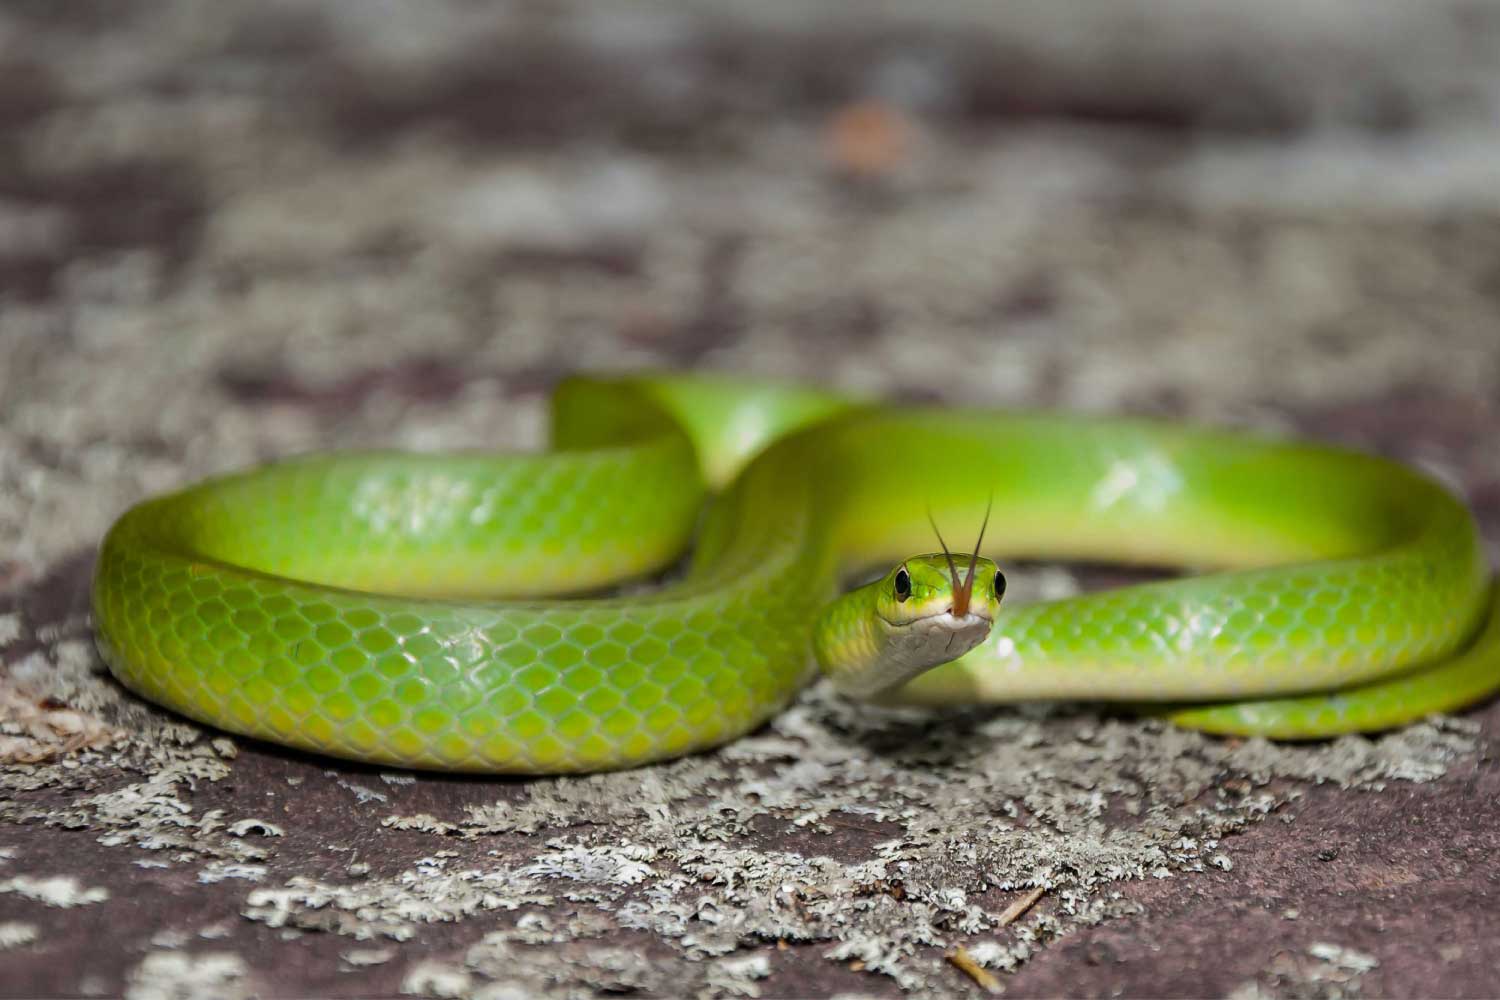 A smooth green snake on the ground with its tongue sticking out.